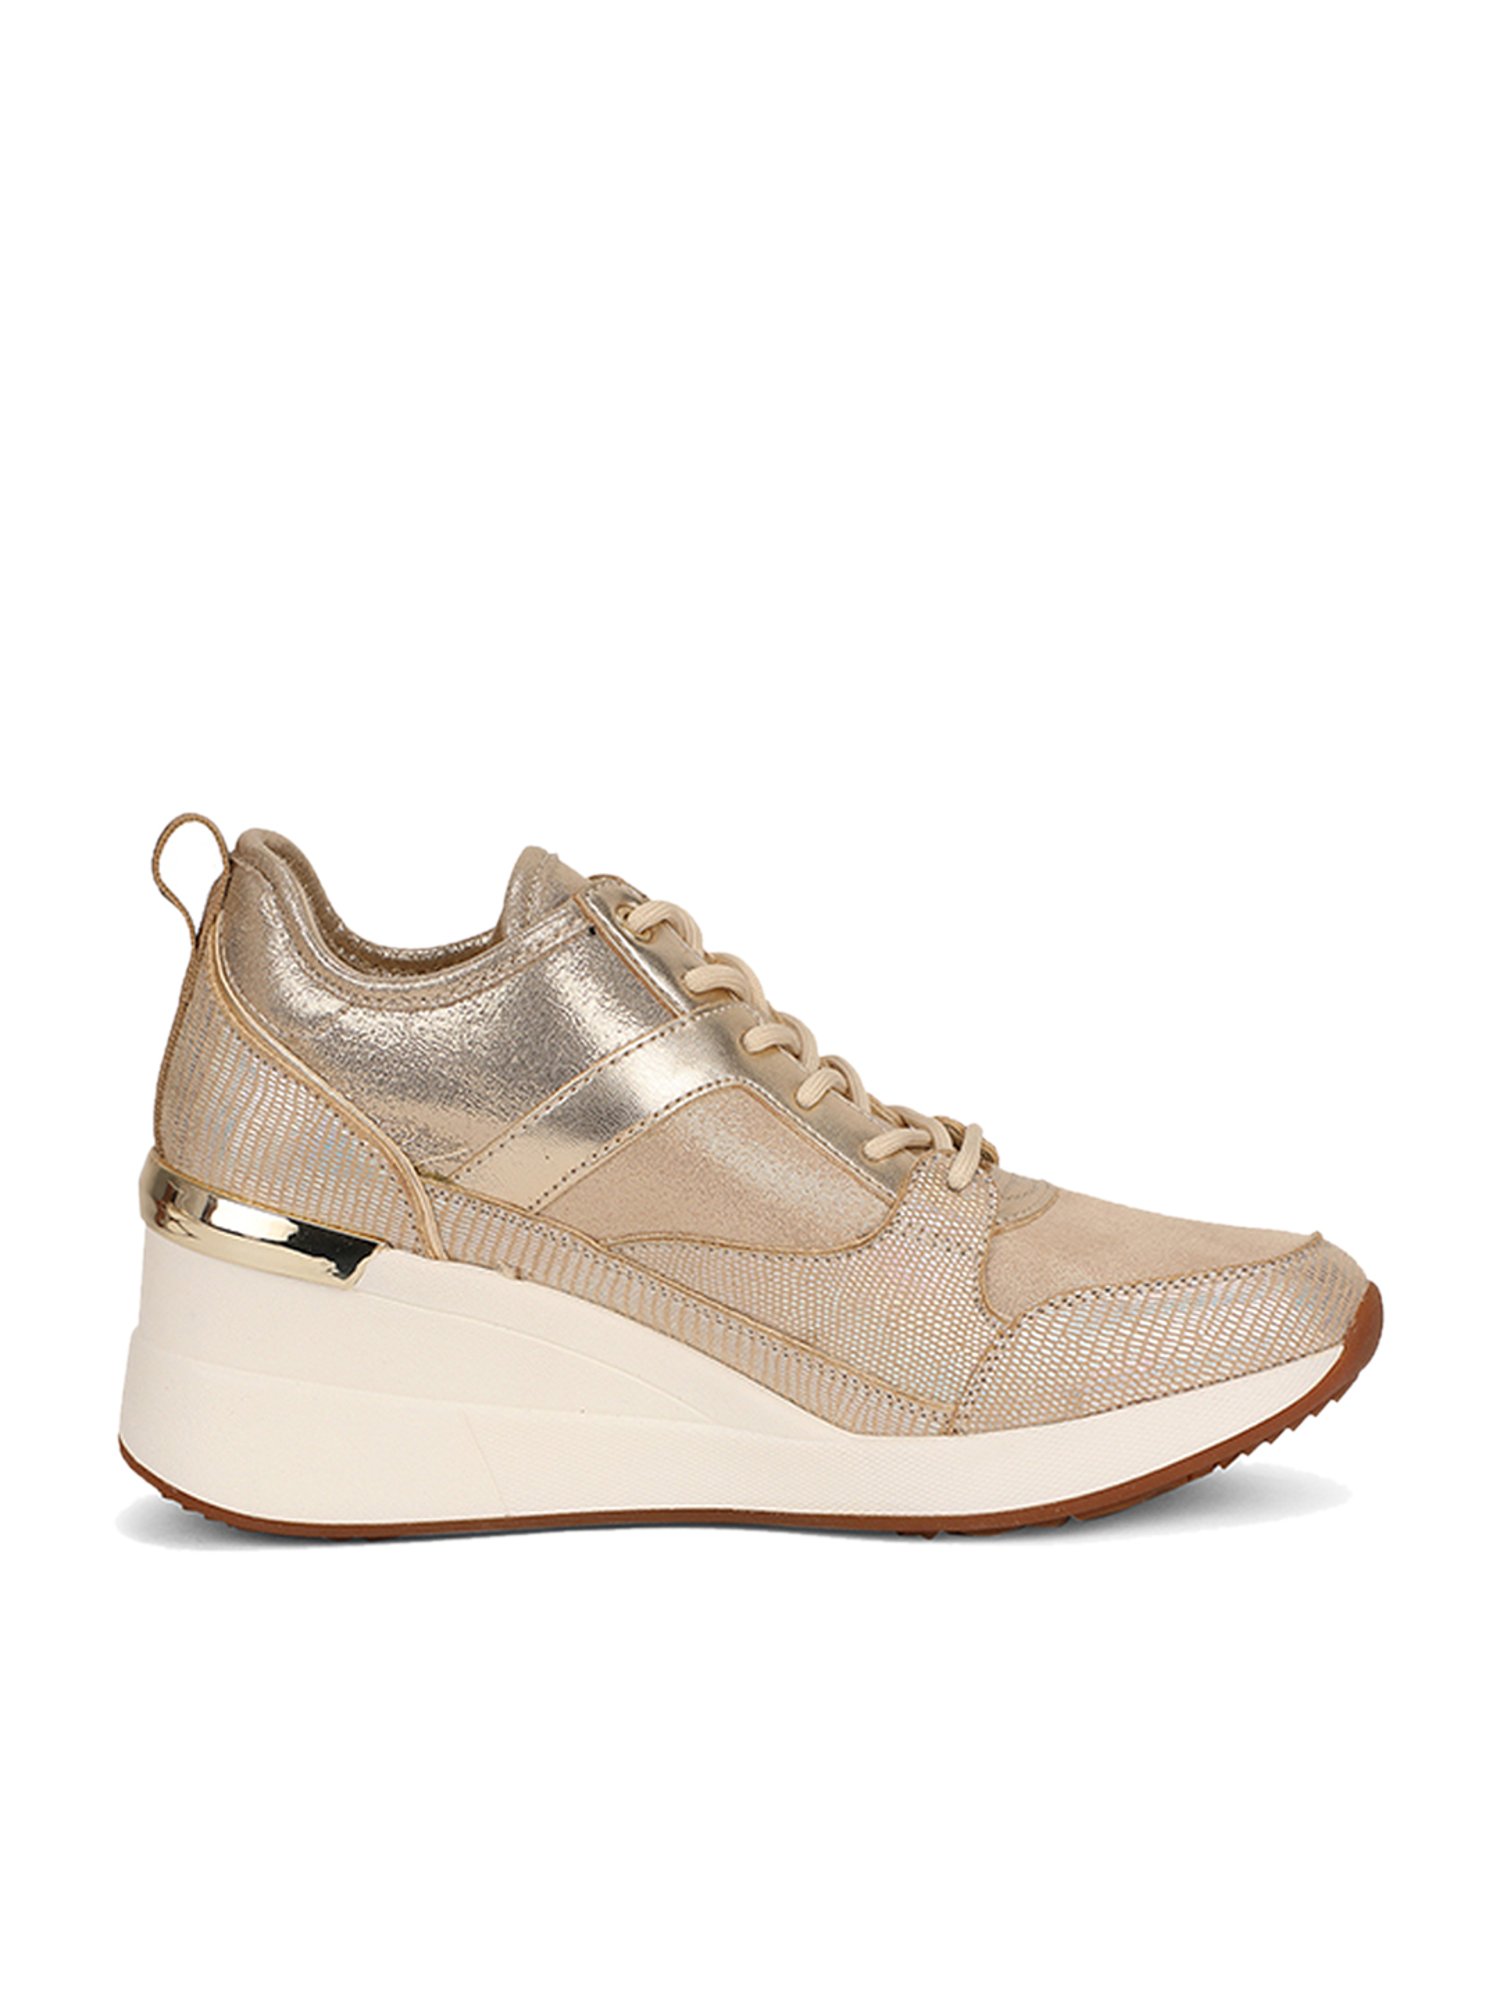 Cynthia Richard Women's Courageous Wedge Sneakers Metallic Gold | Laurie's  Shoes